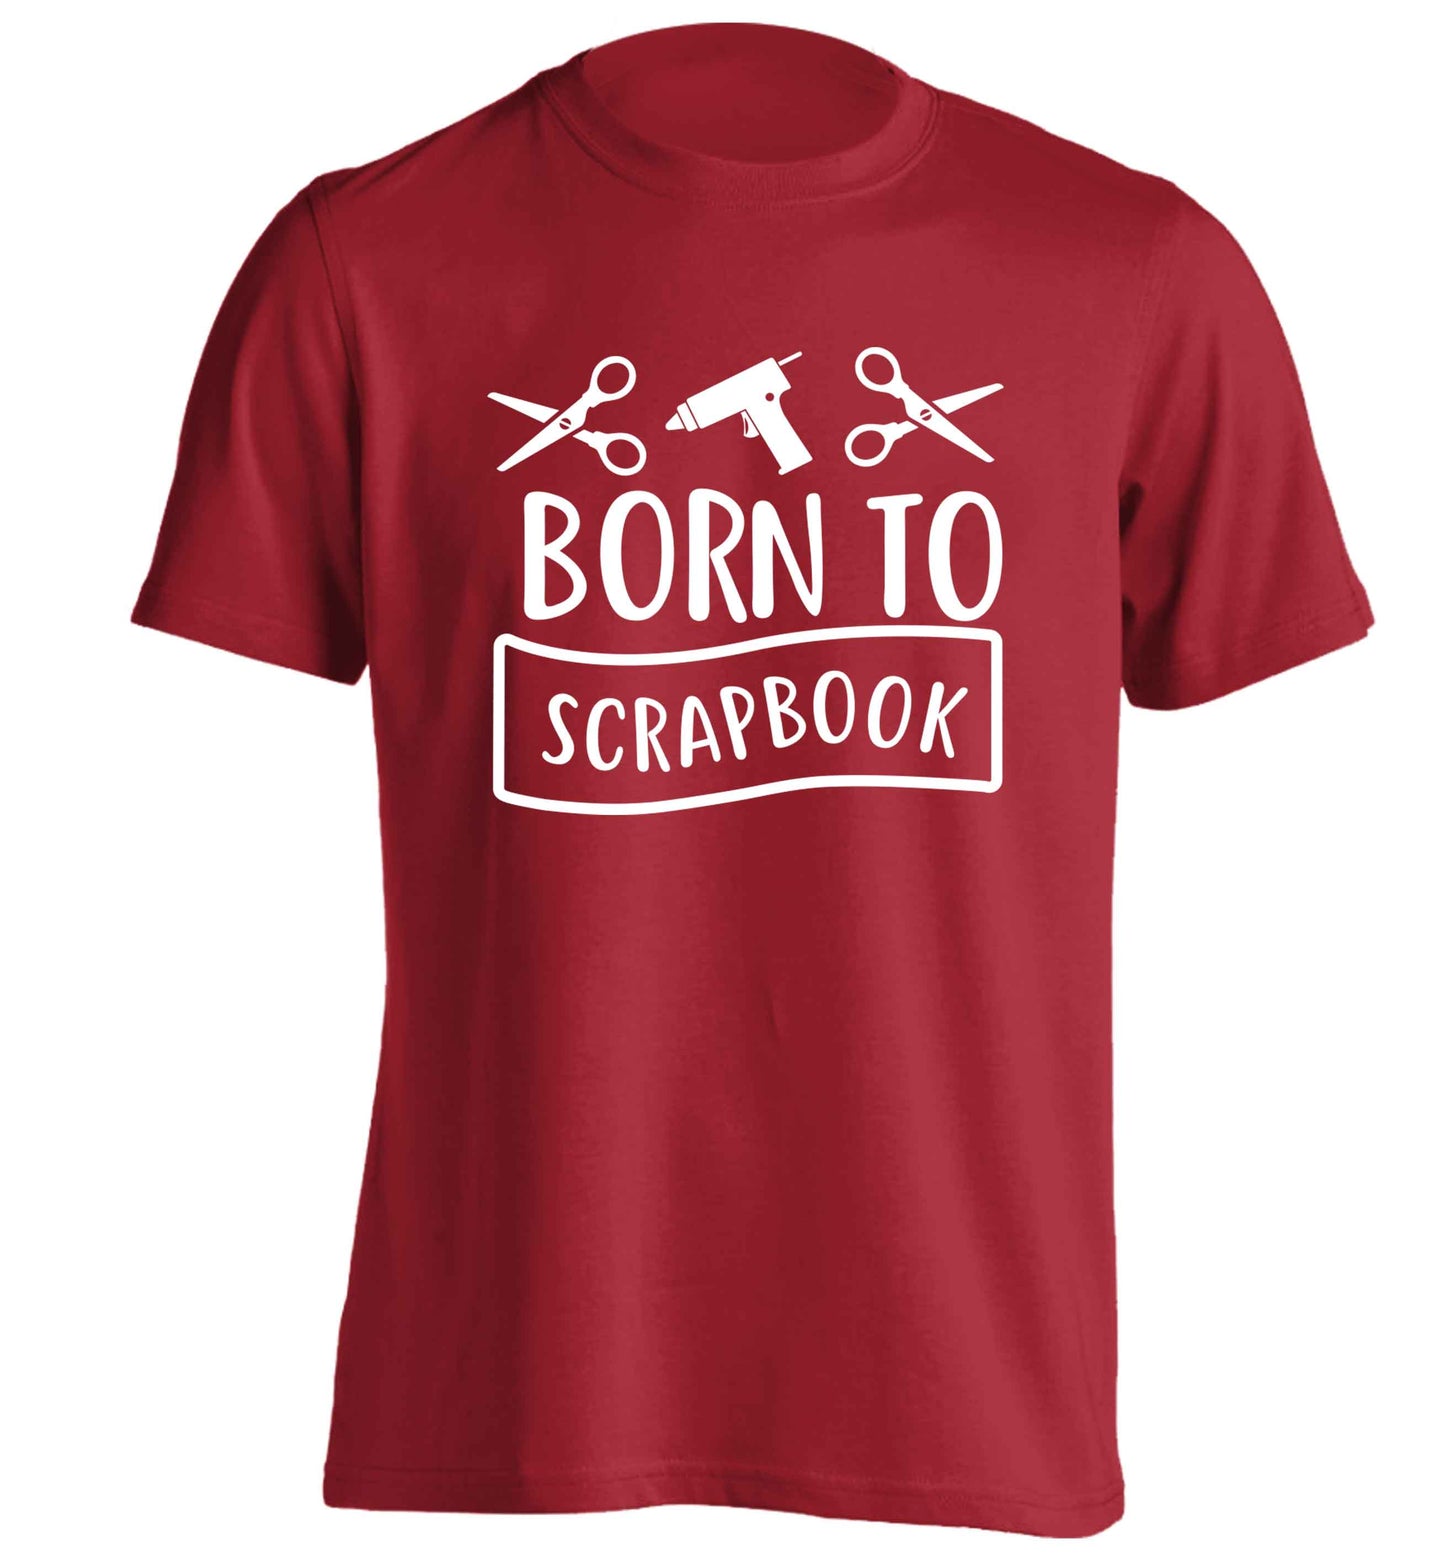 Born to scrapbook adults unisex red Tshirt 2XL